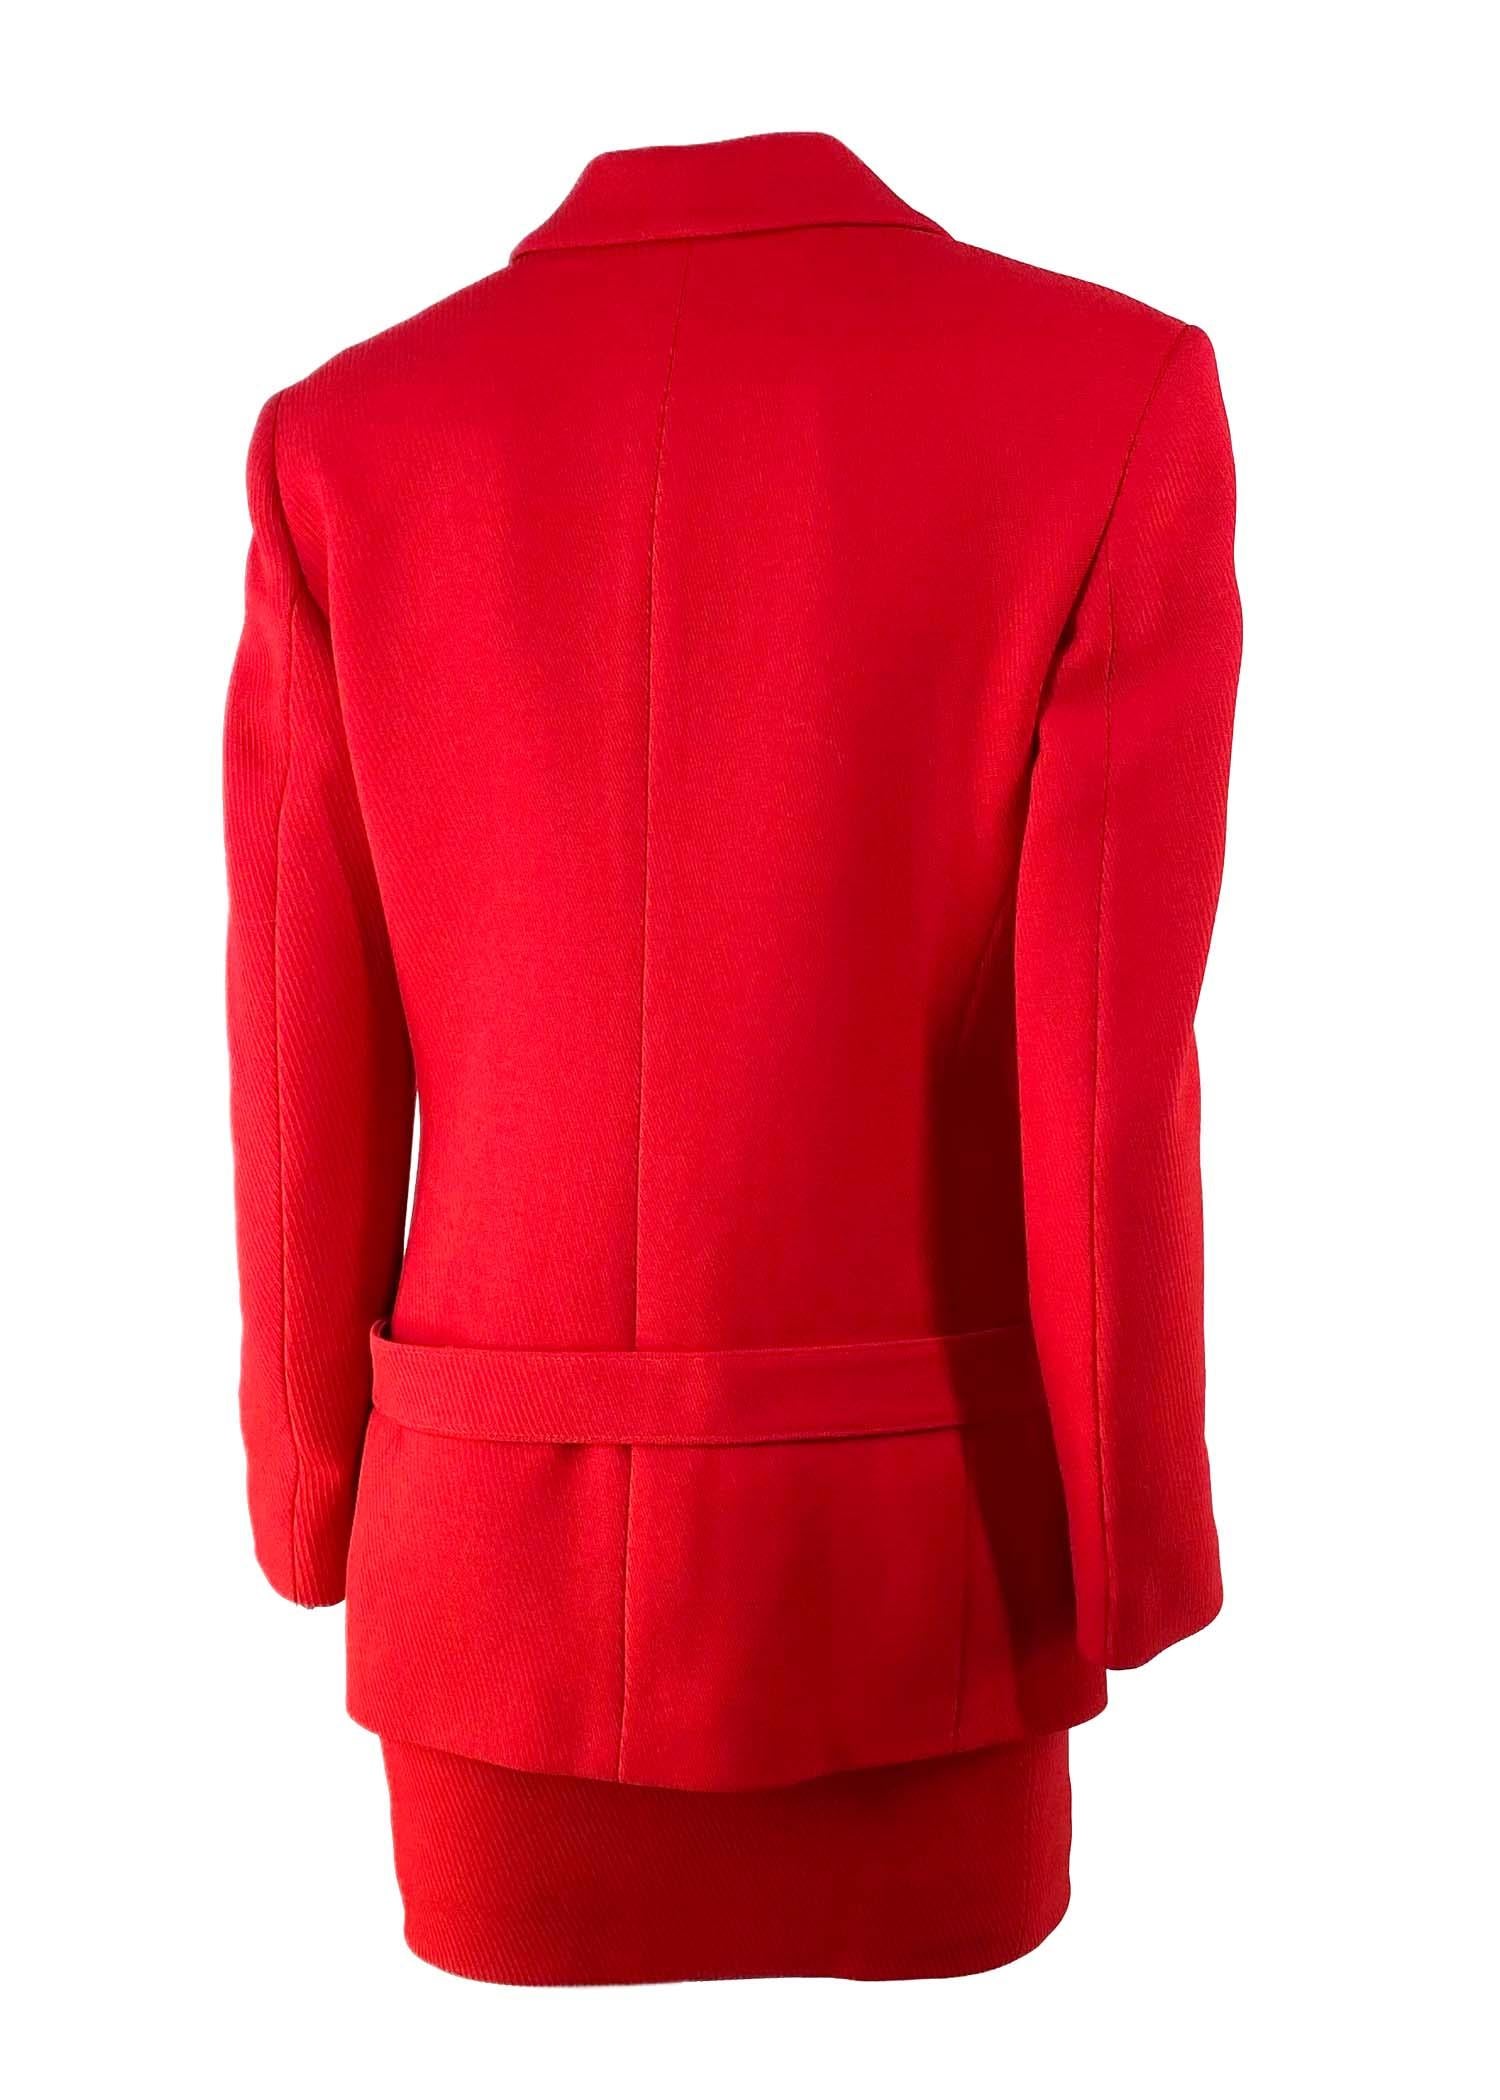 NWT F/W 1997 Gianni Versace Final Runway Red Wool Belted Skirt Suit New For Sale 1